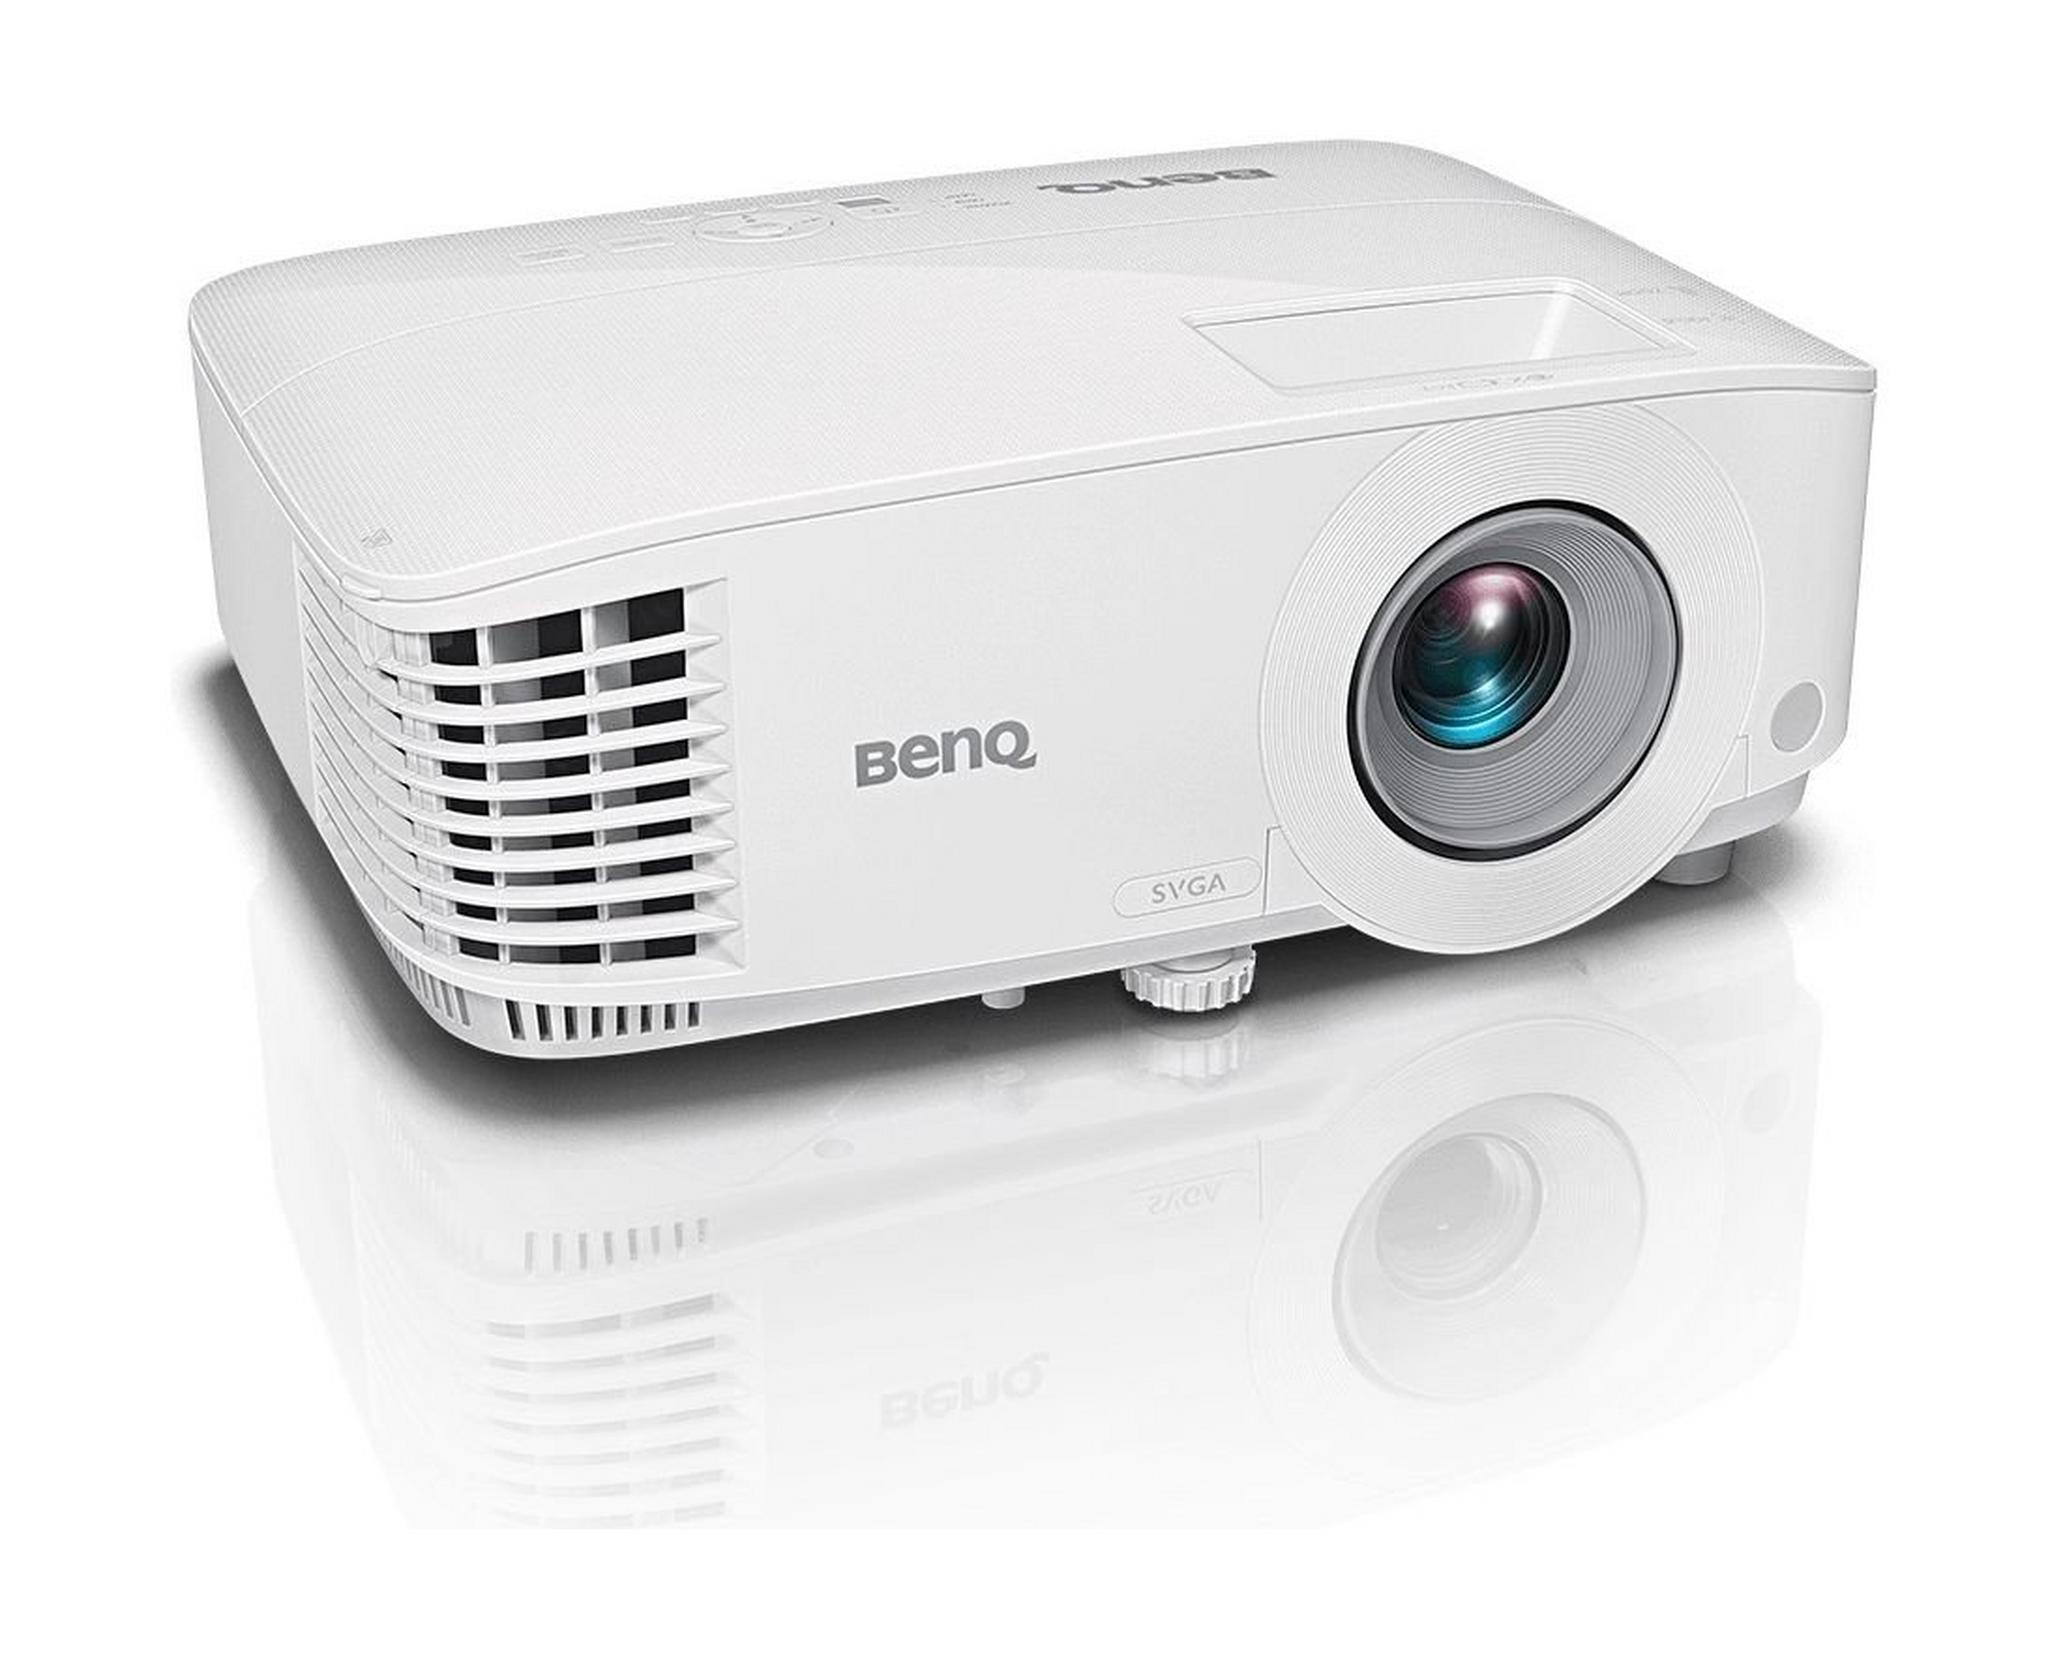 BenQ 3600lm SVGA Business Projector - MS550